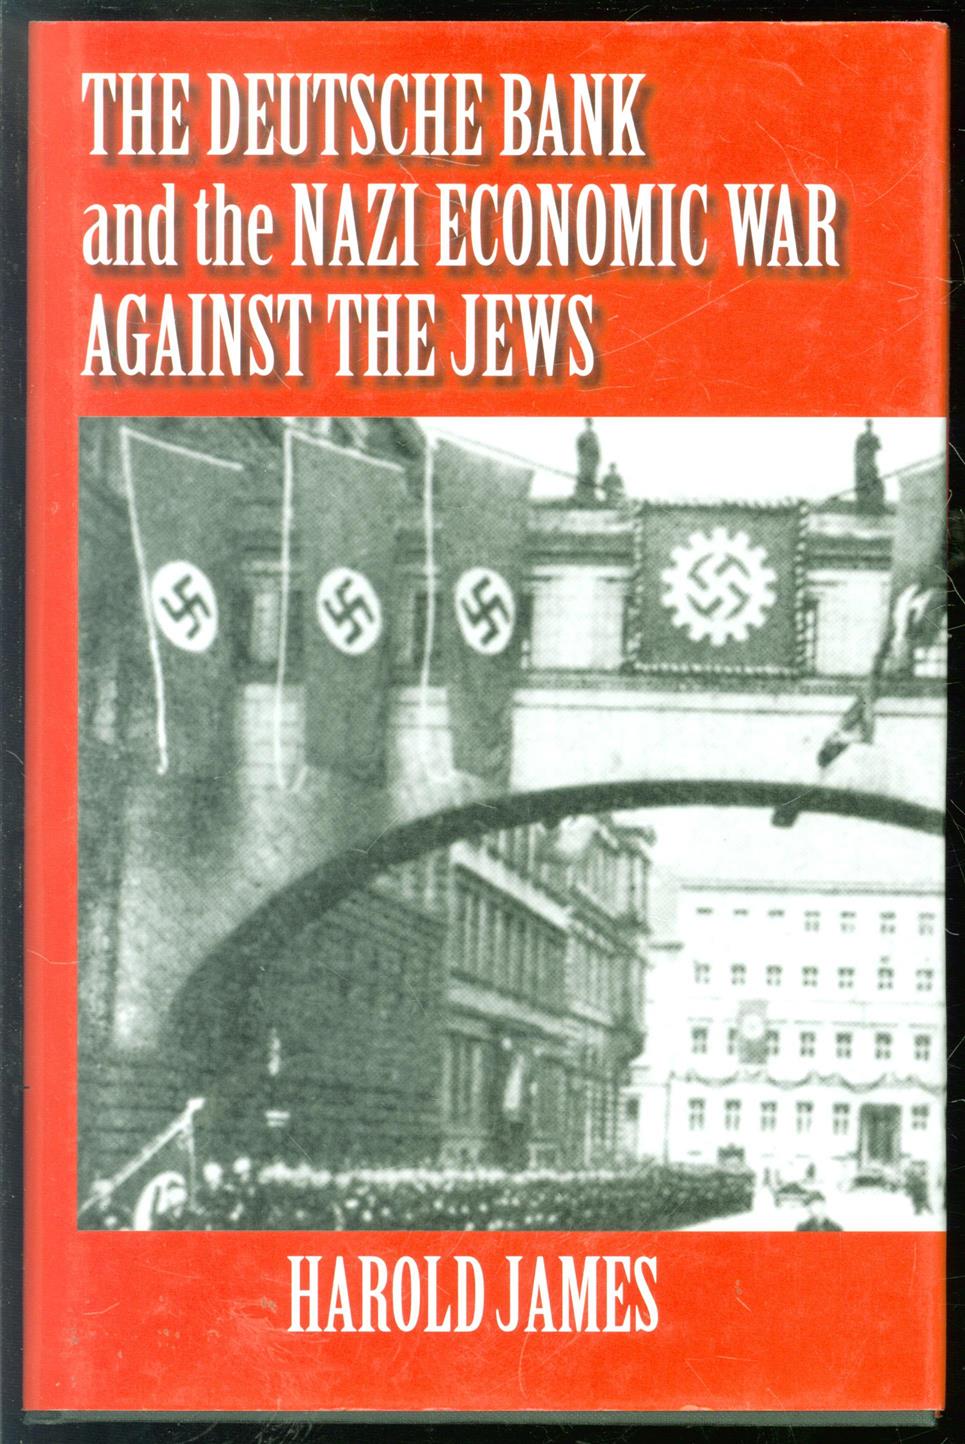 Harold James historicus, - The Deutsche Bank and the Nazi economic war against the Jews: the expropriation of Jewish-owned property